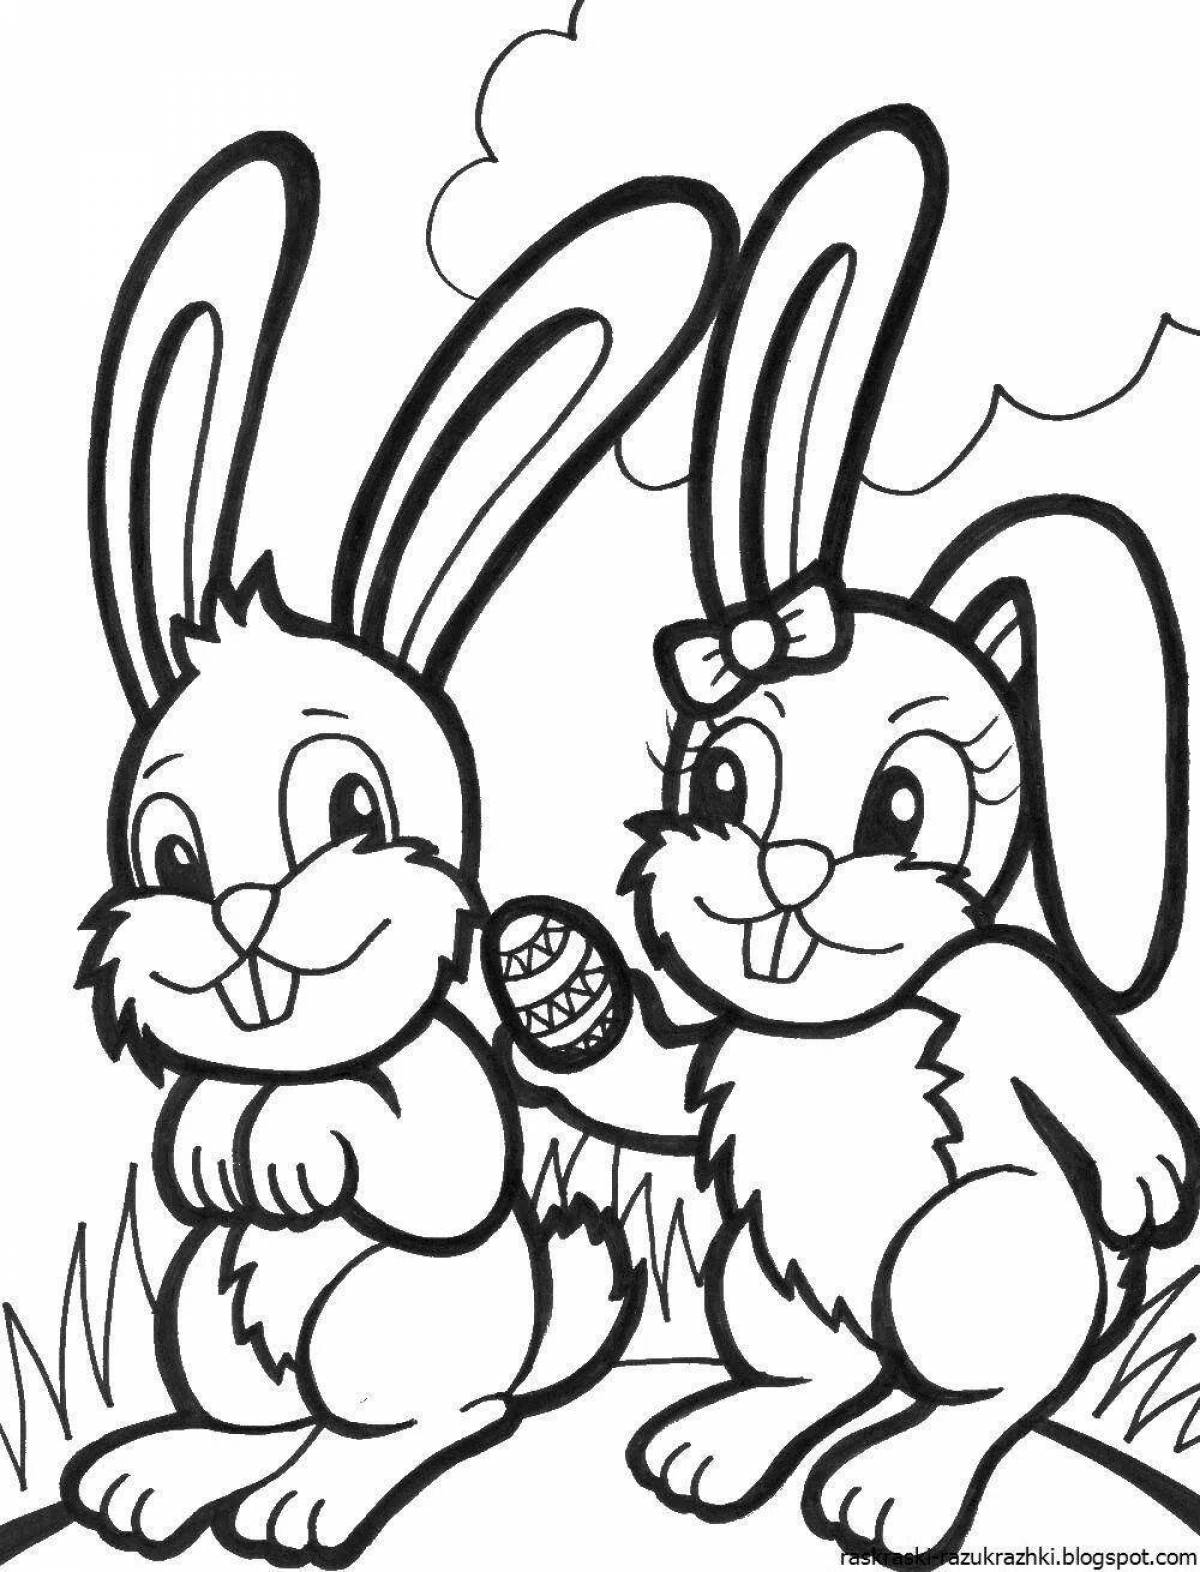 Fluffy Bunny coloring book